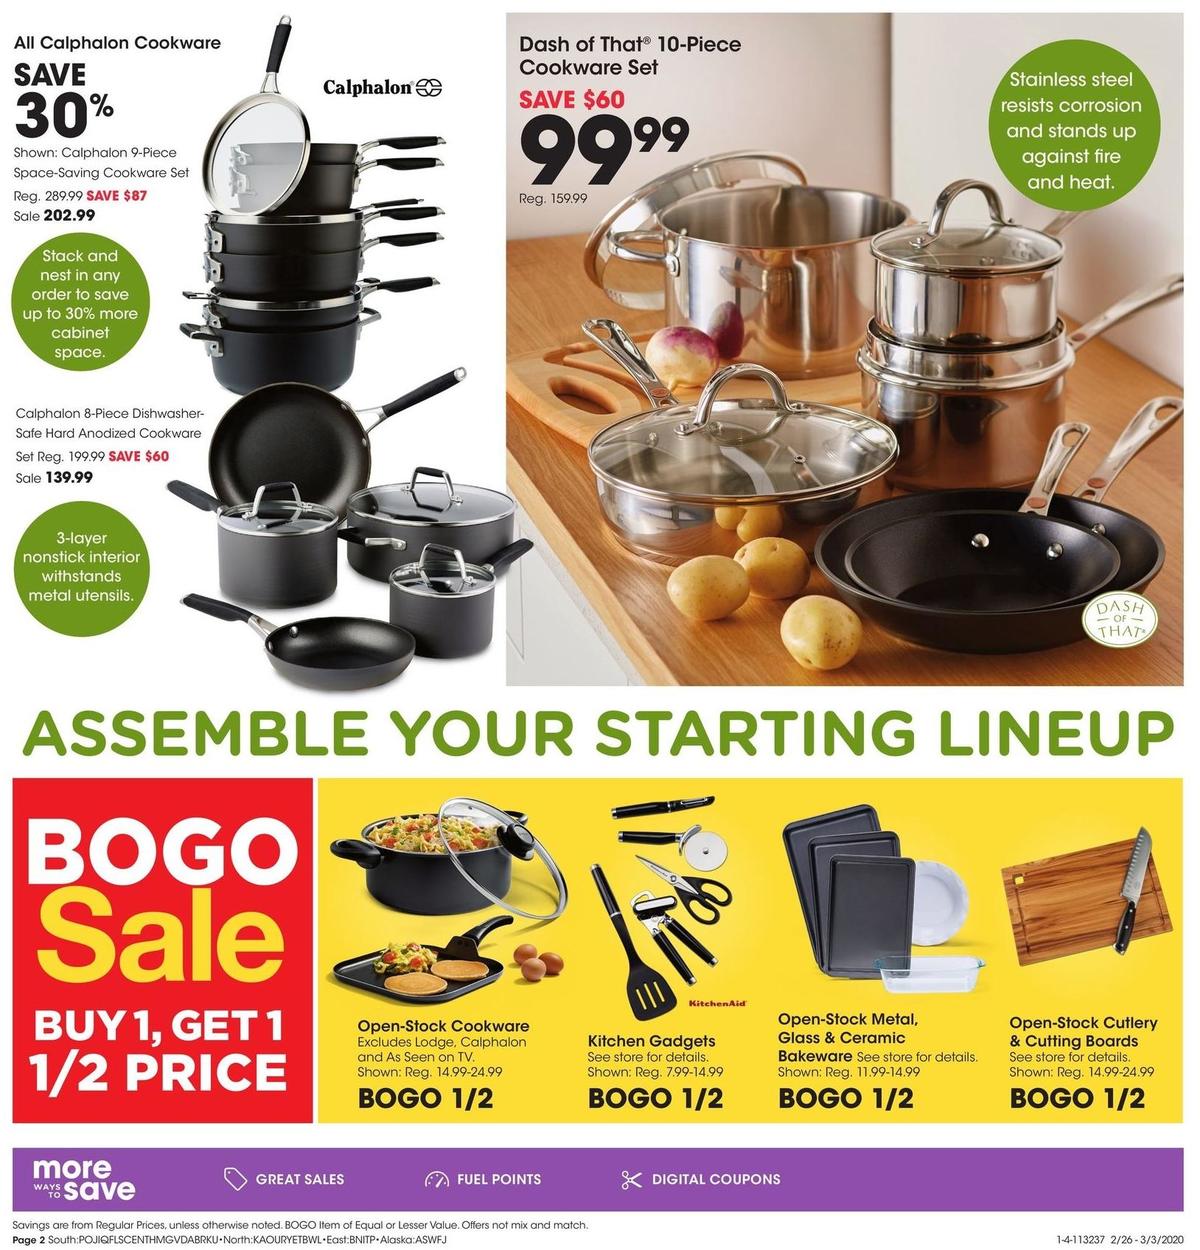 Fred Meyer General Merchandise Weekly Ad from February 26